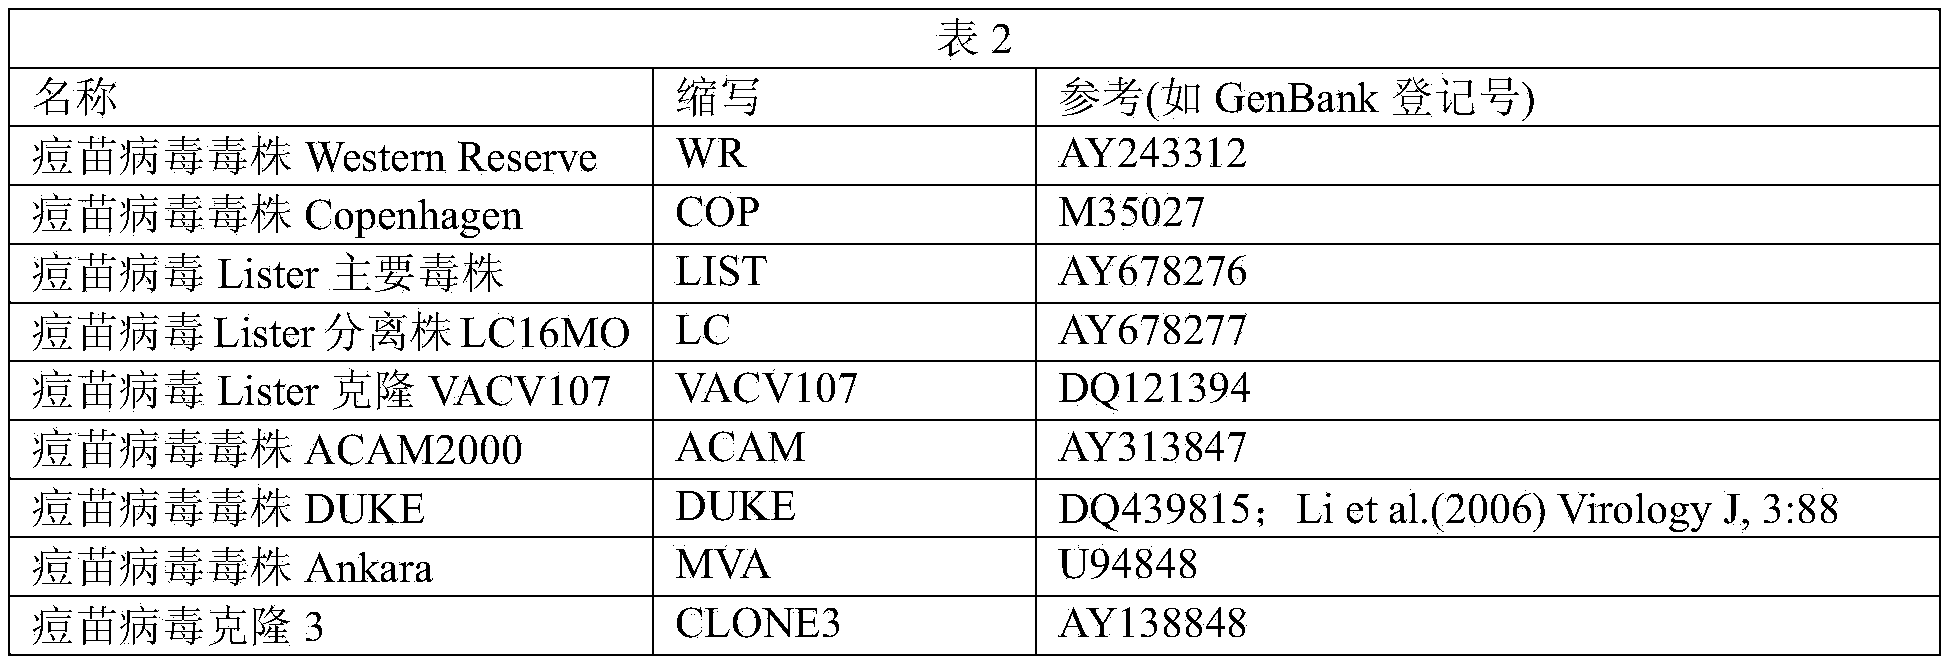 Clonal strains of attenuated vaccinia viruses and methods of use thereof